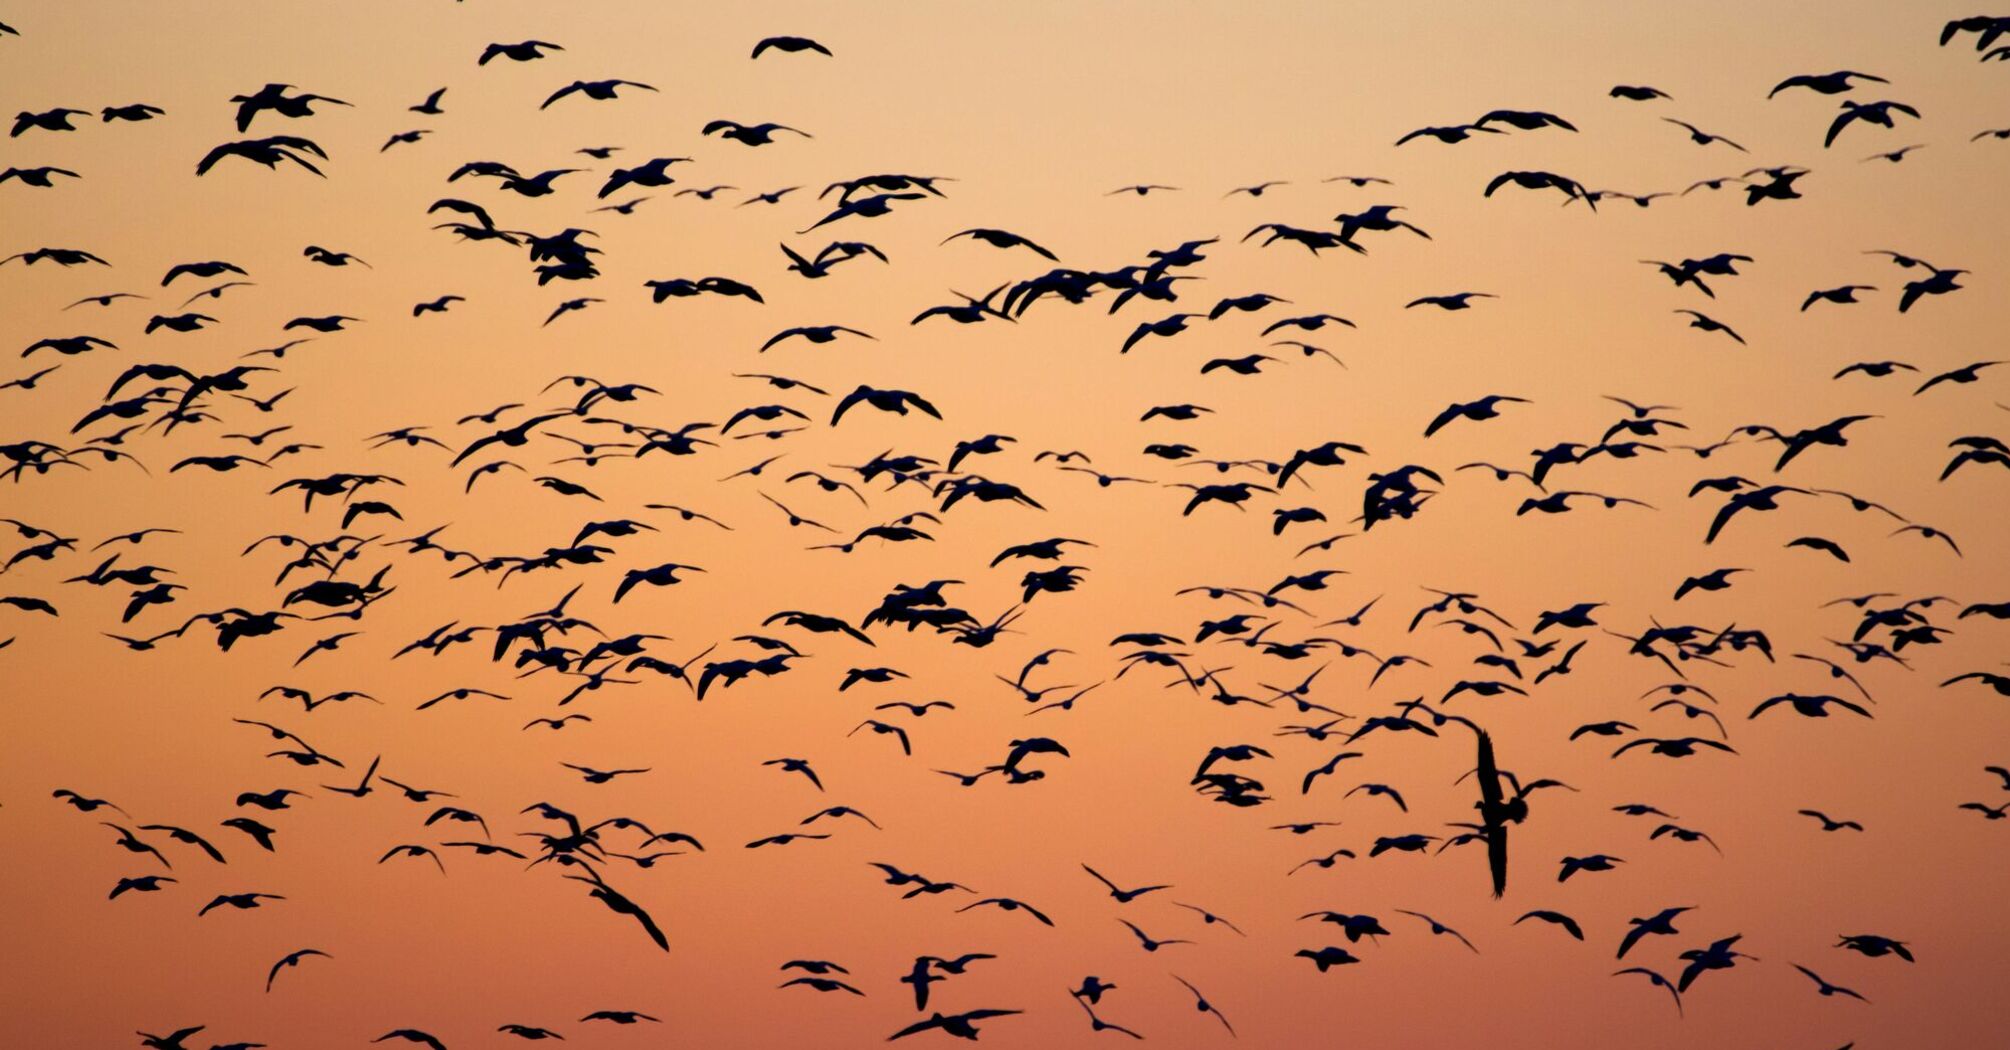 A flock of birds silhouetted against a vibrant orange sky at dusk